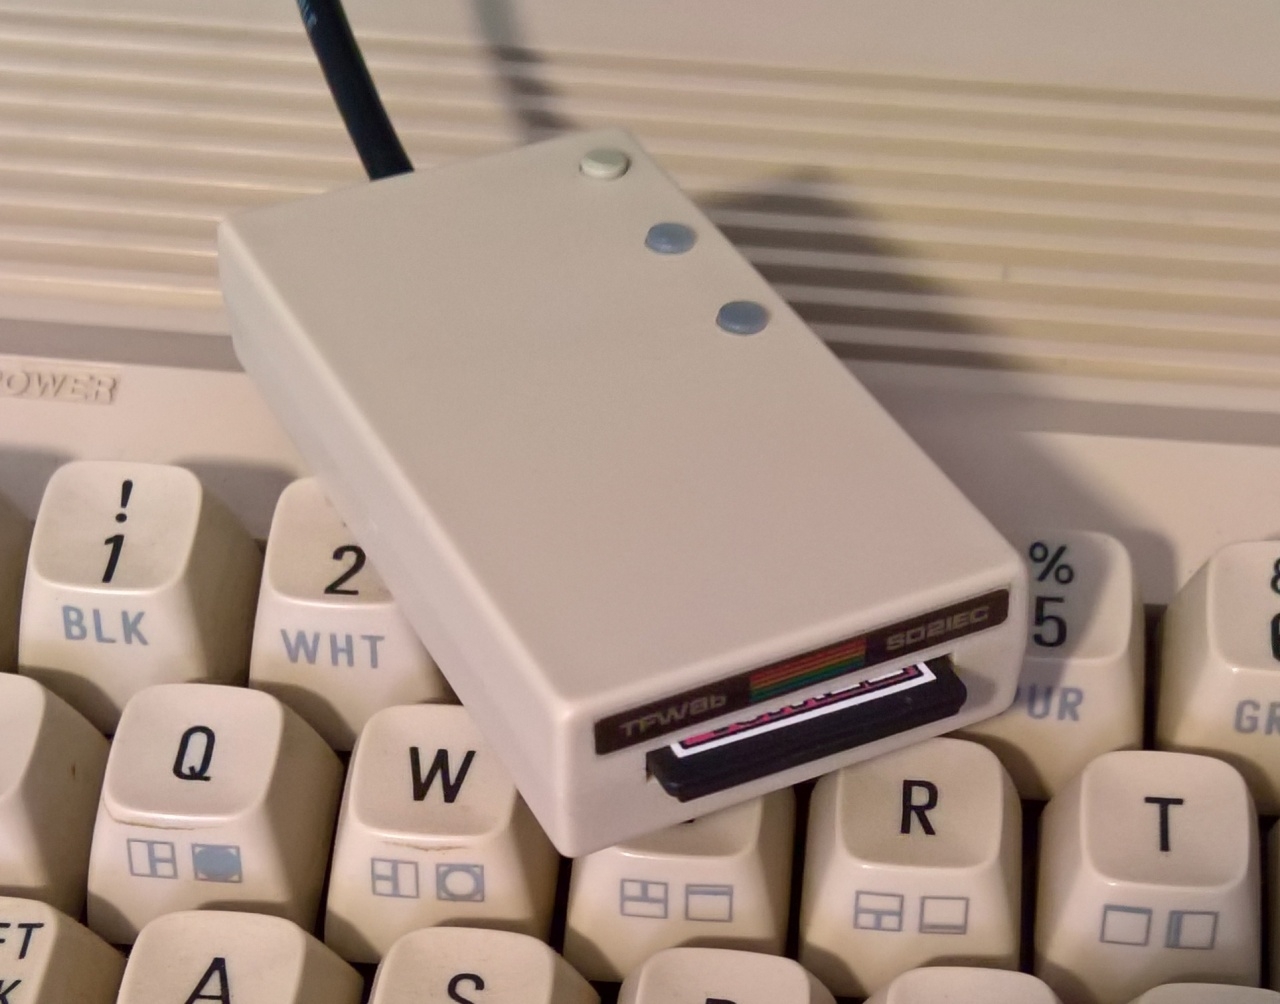 TFW8b's SD2IEC made from Recycled C64C Plastic!